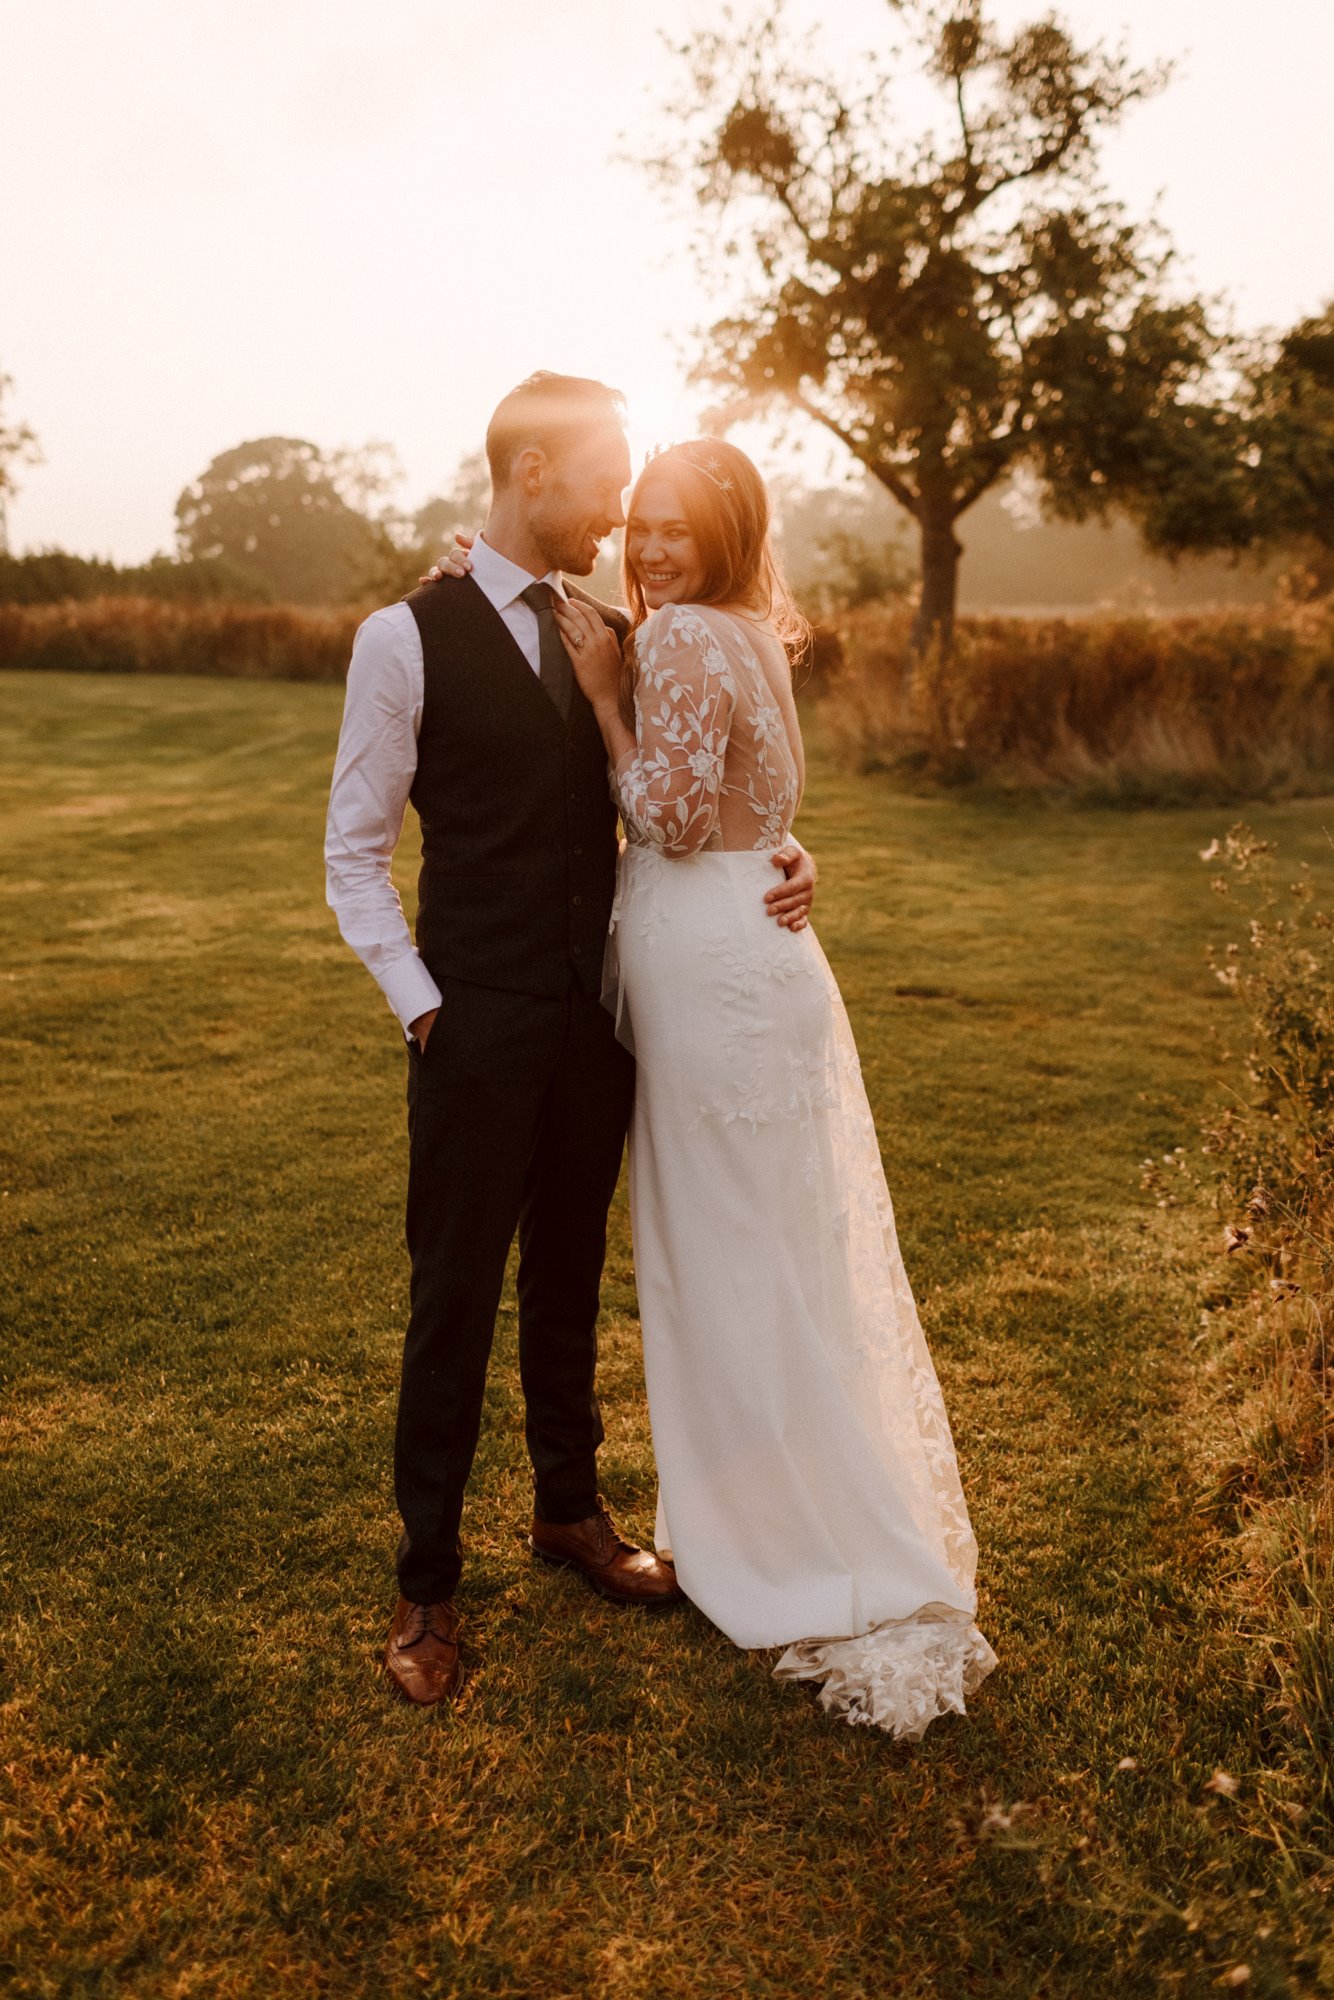 September wedding golden glow couple shots at sunset at this beautiful boho wedding in the countryside